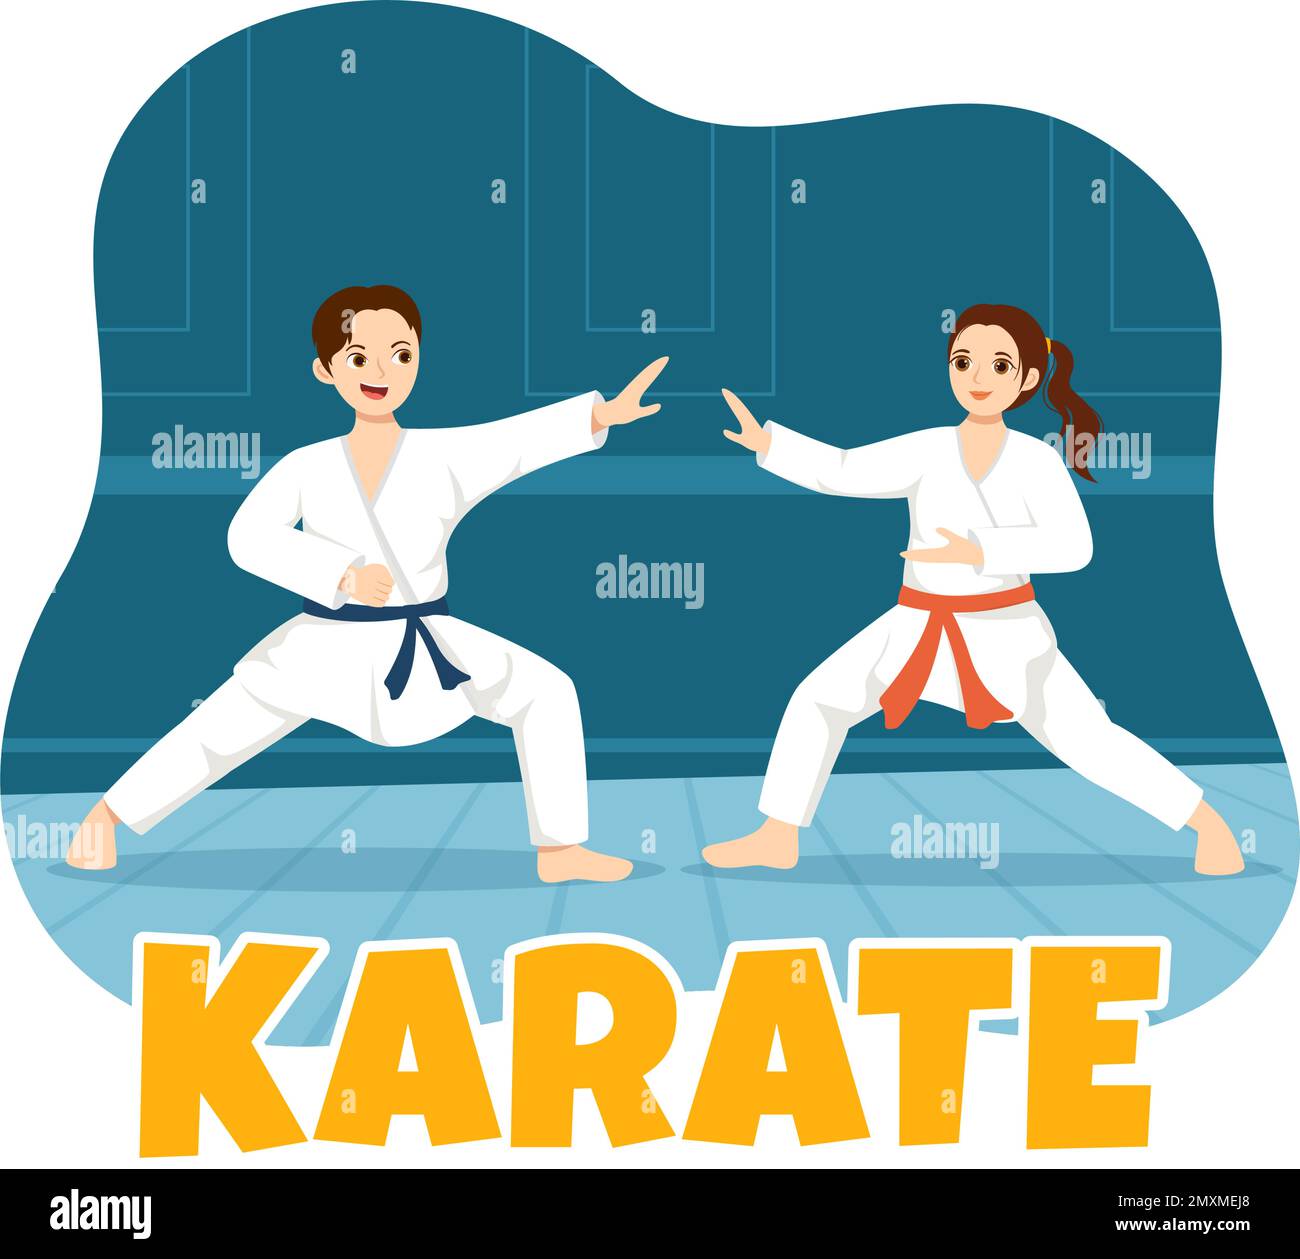 People Doing Some Basic Karate Martial Arts Moves, Fighting Pose and Wearing Kimono in Cartoon Hand Drawn for Landing Page Templates Illustration Stock Vector